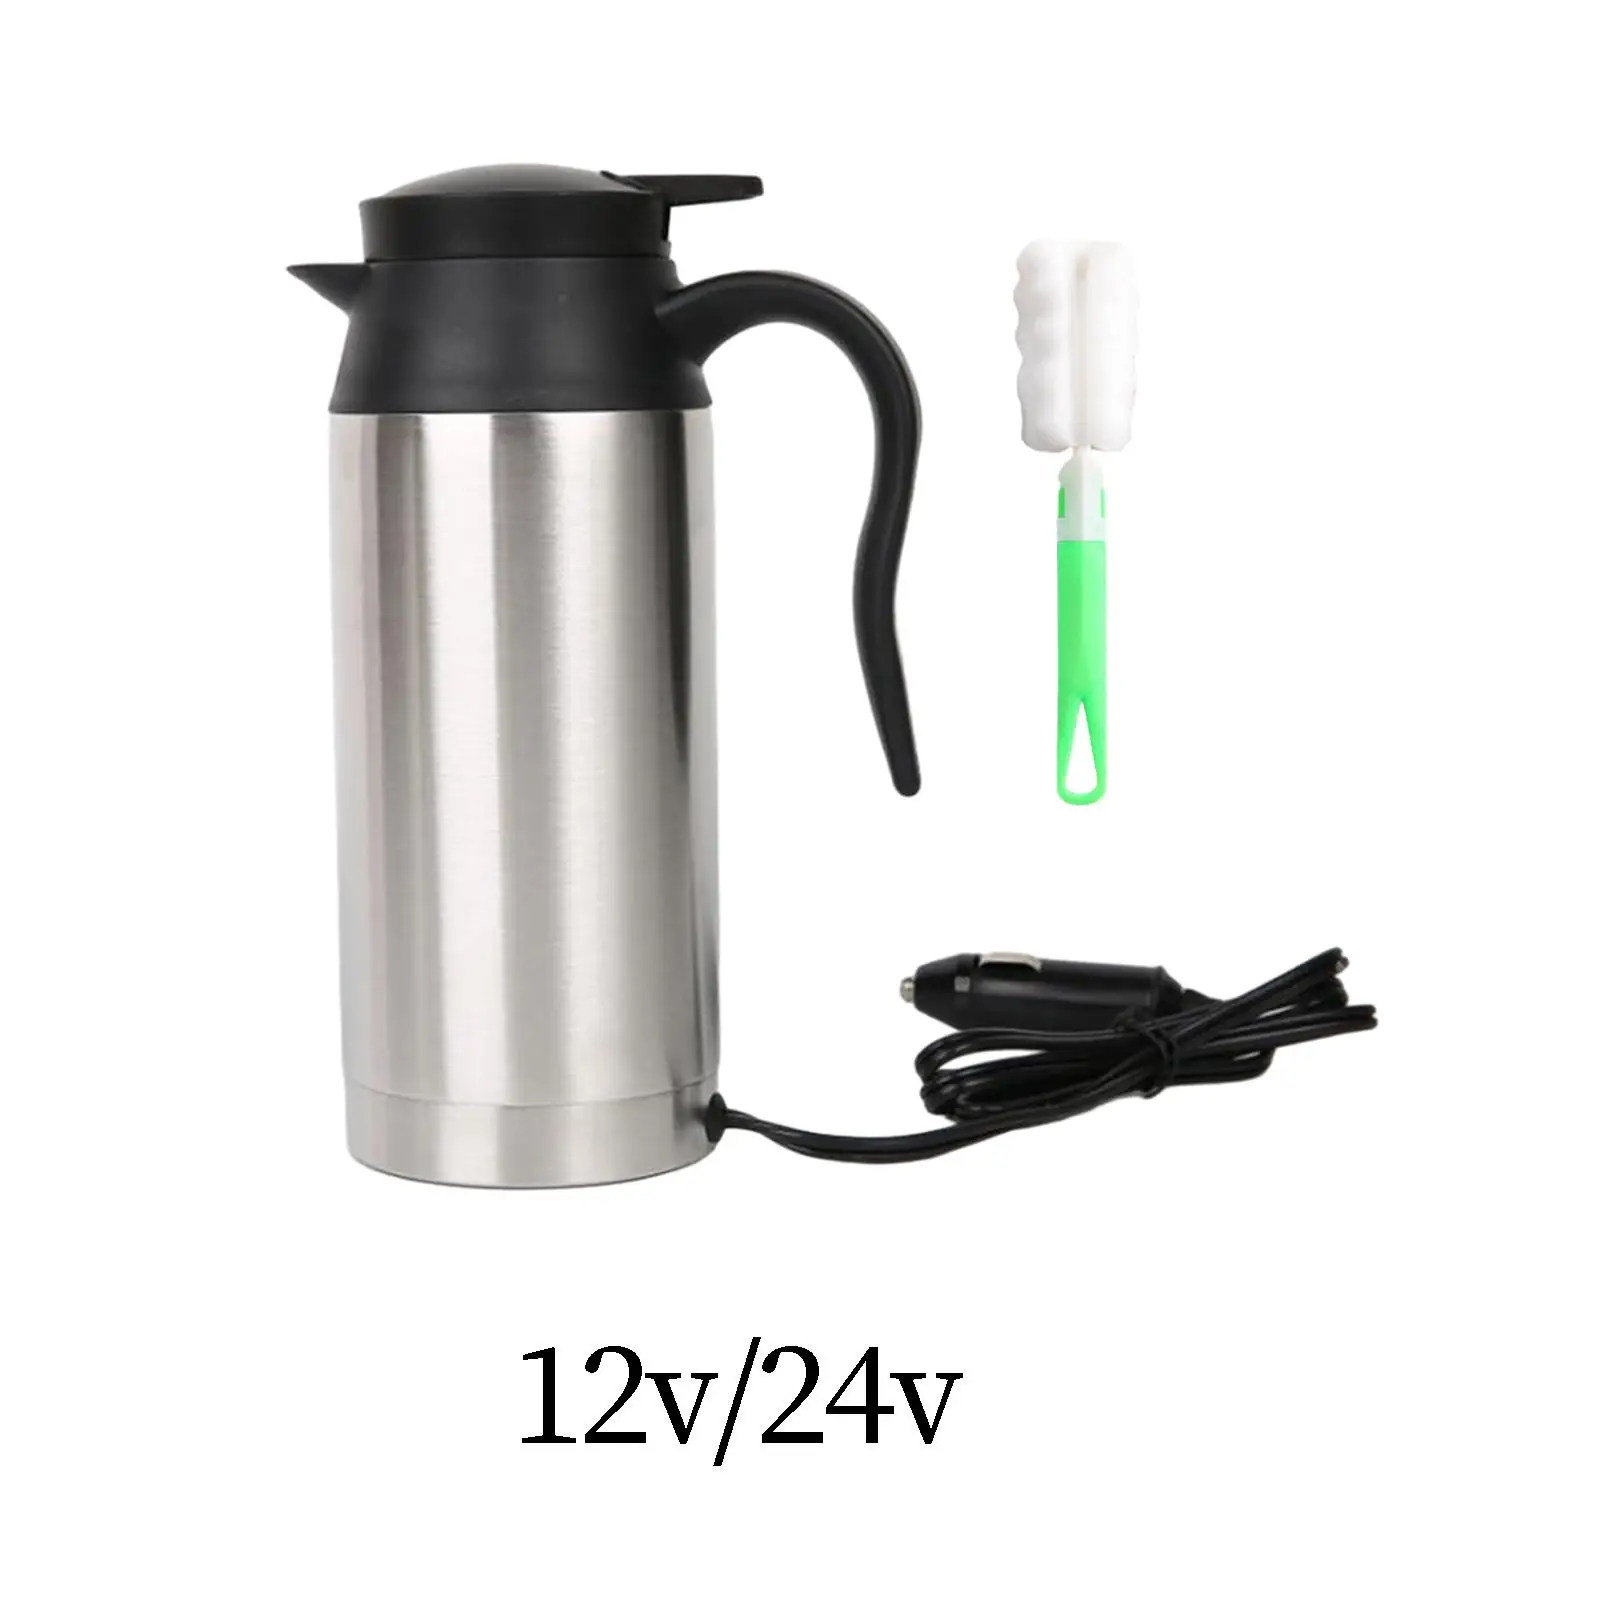 Car Travel Kettle for Boiling Water, Eggs, Coffee, Tea Lorry Truck Heater Bottle Pot for Car Driving Tour Drivers Truck